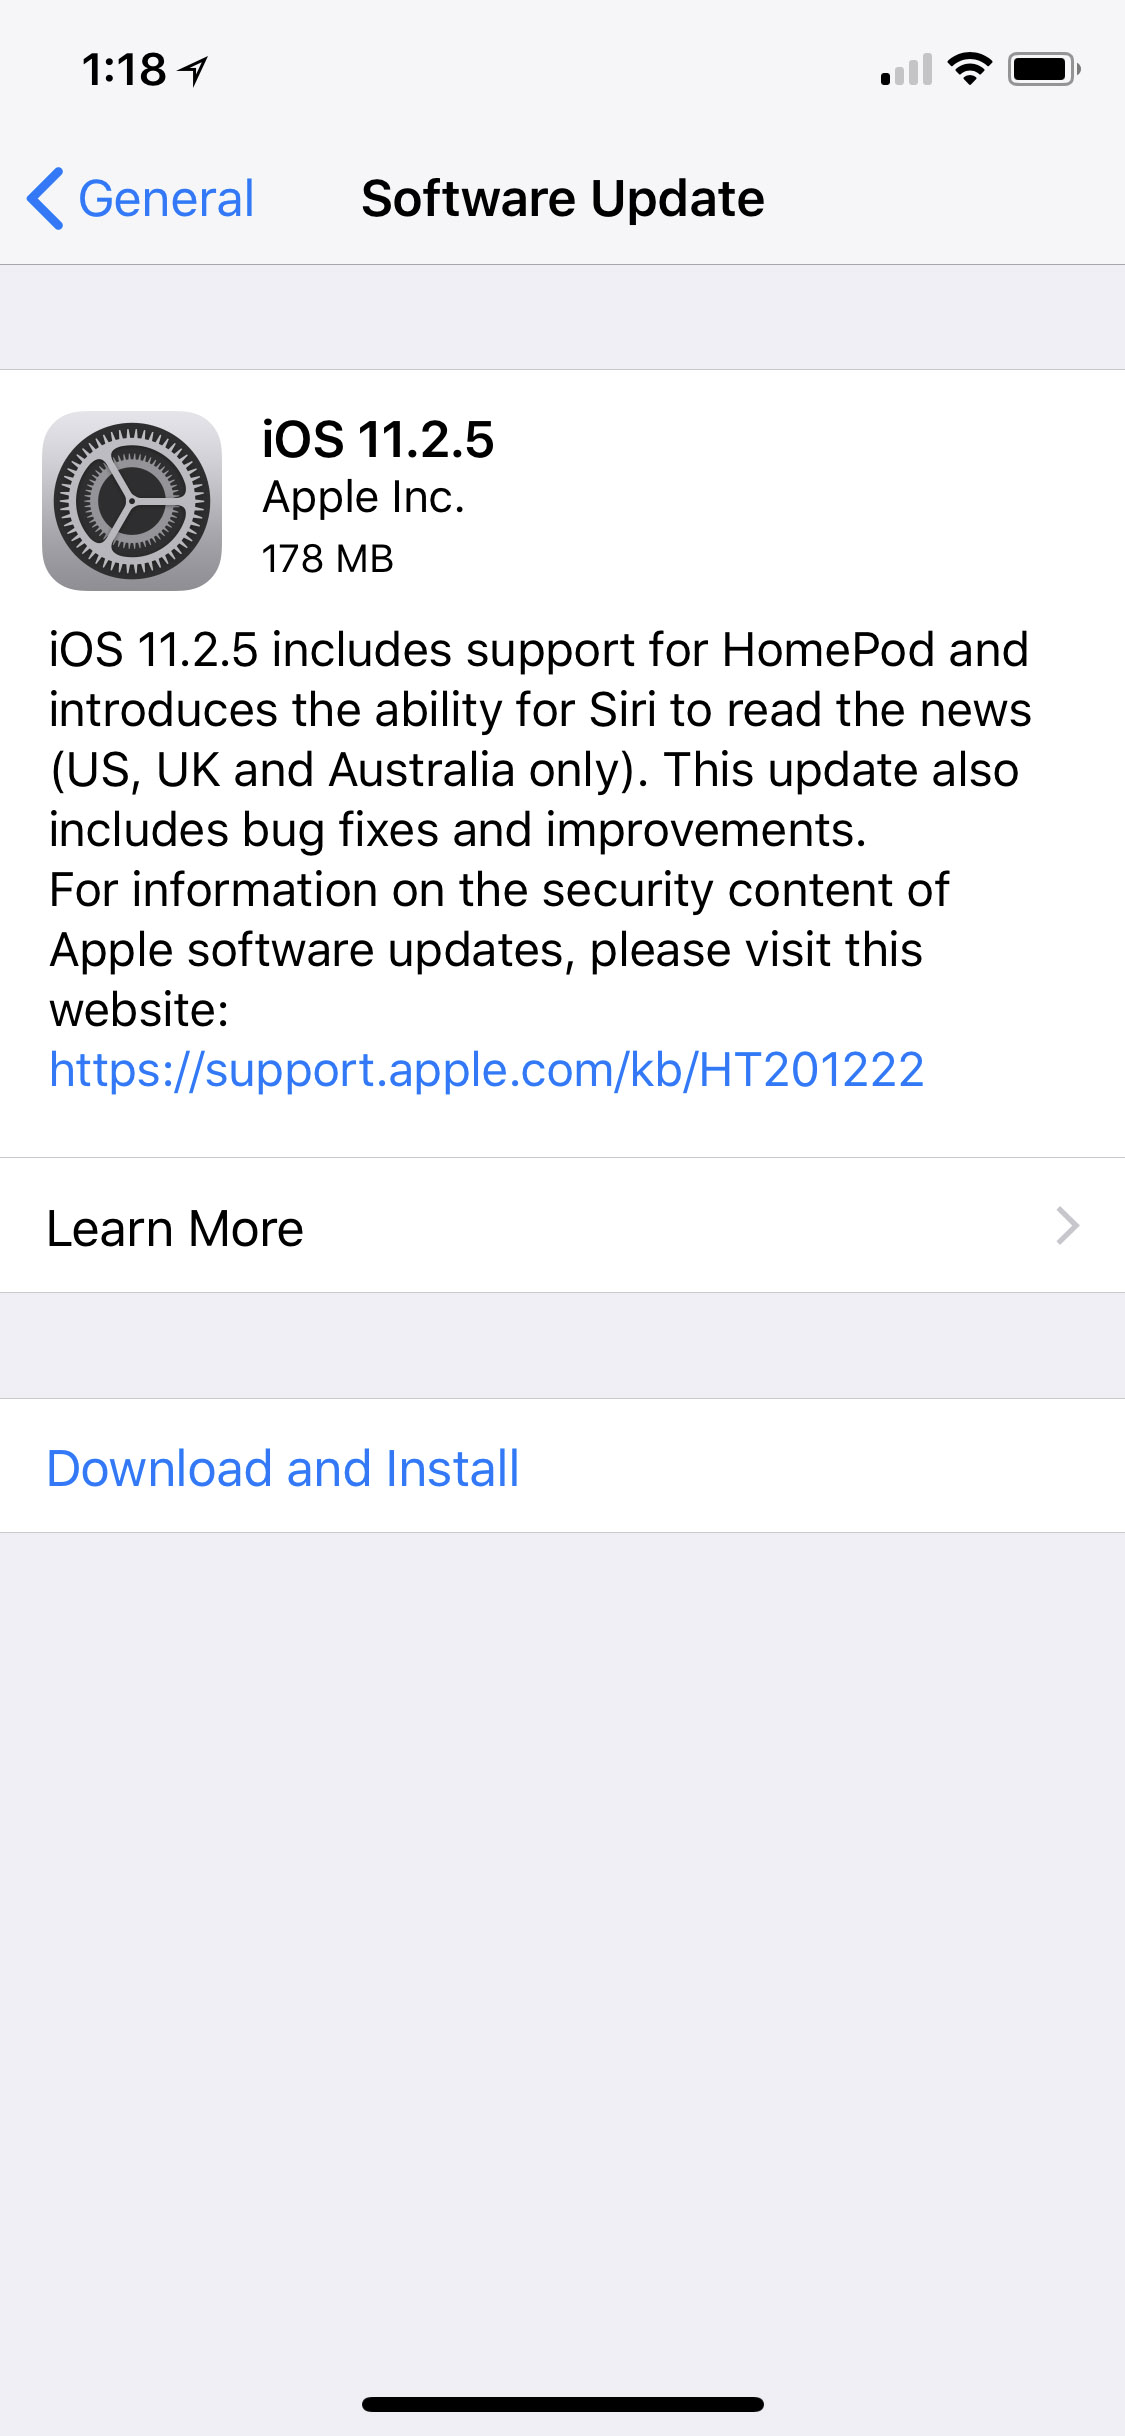 Apple Releases iOS 11.2.5 for iPhone, iPad, and iPod touch [Download]